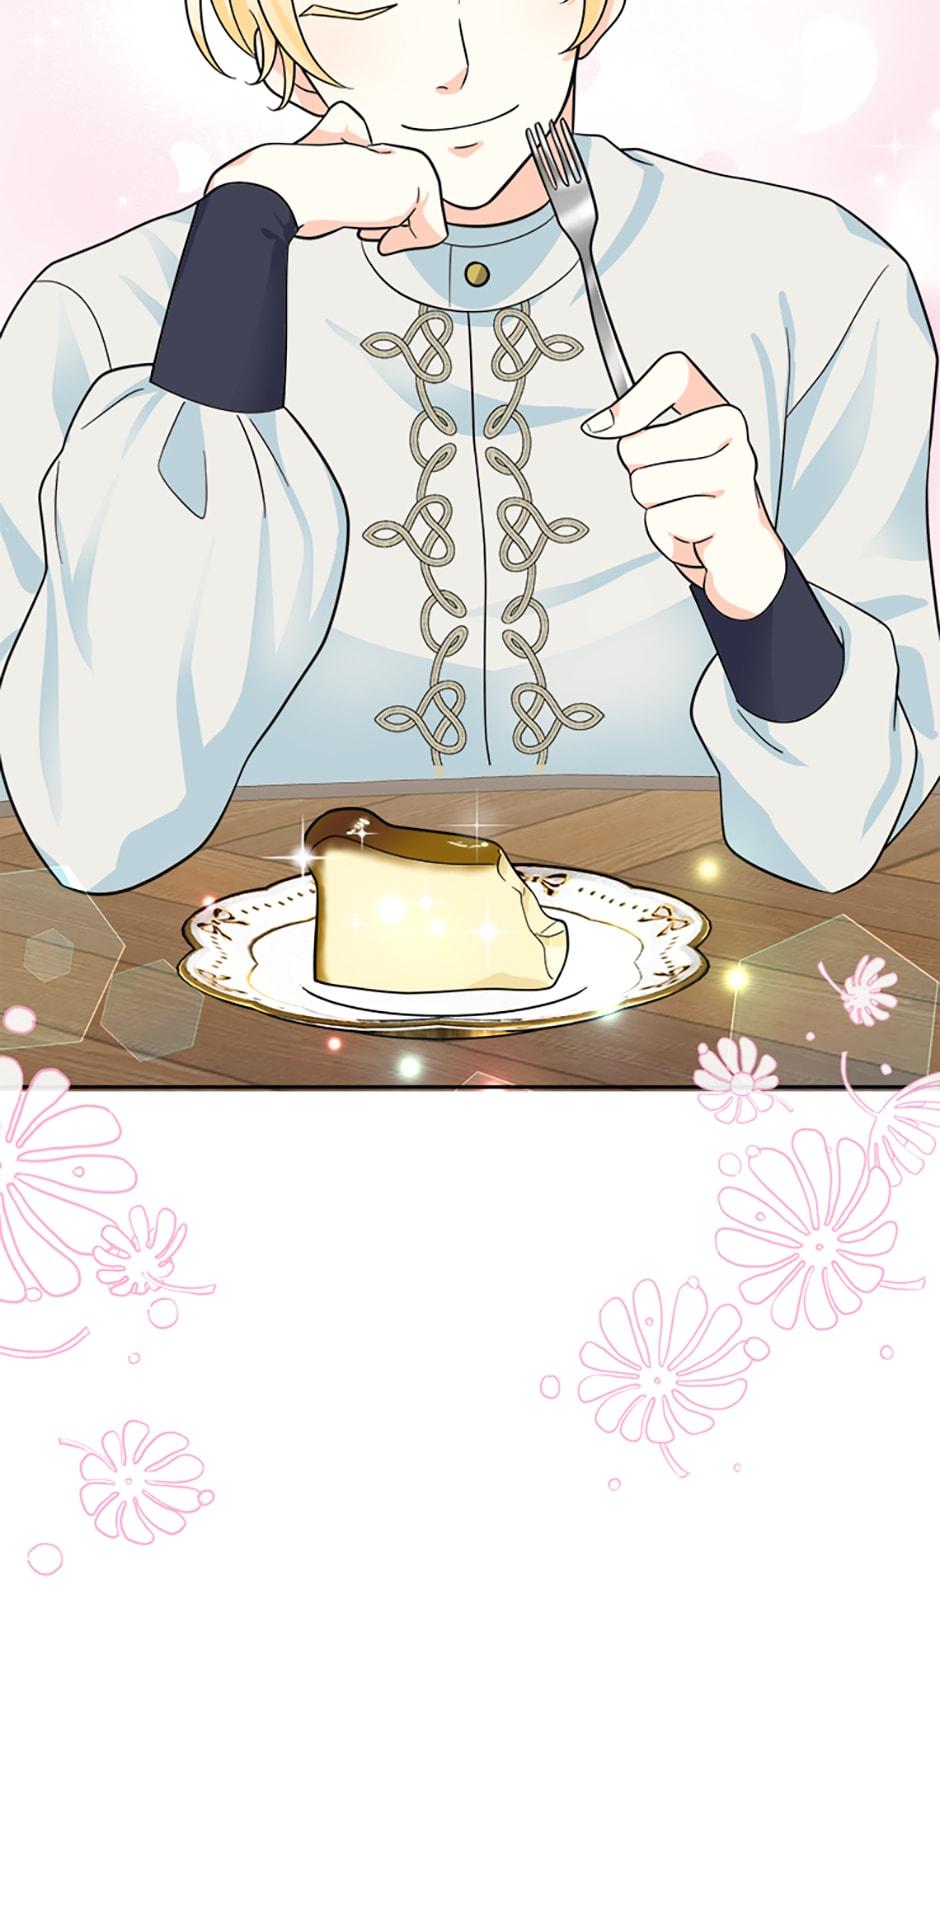 She came back and opened a dessert shop chapter 23